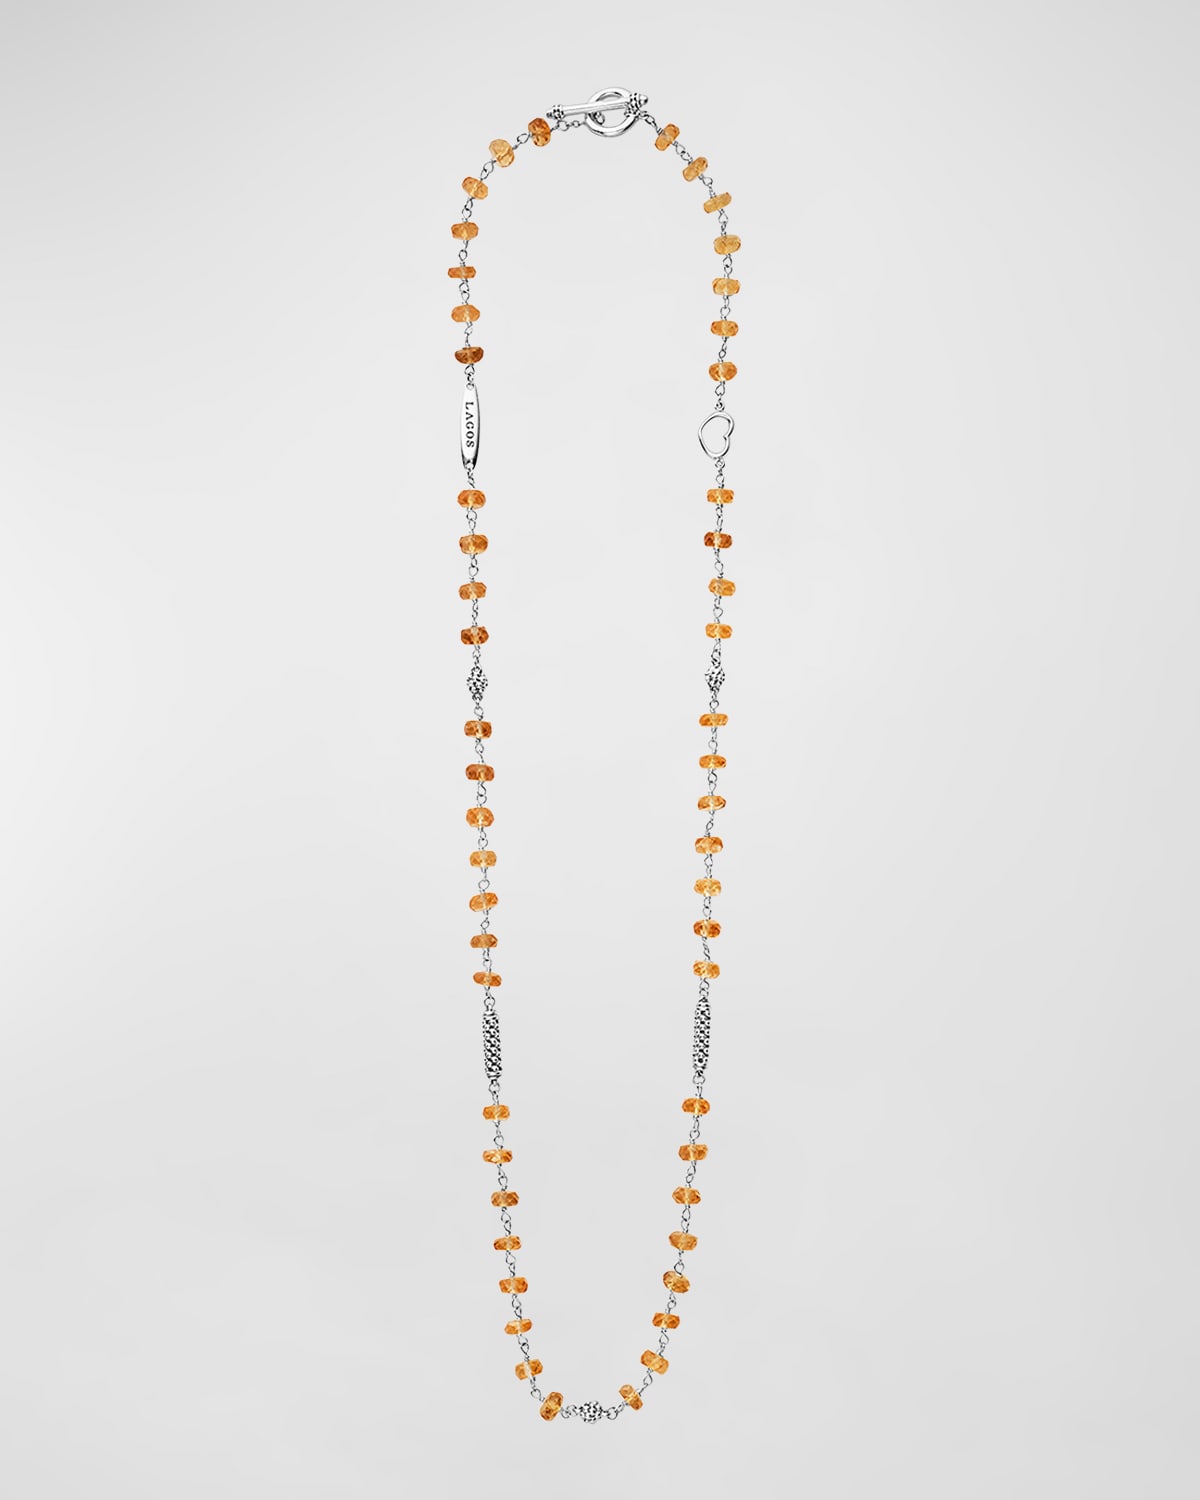 LAGOS CAVIER ICON STERLING SILVER & CITRINE NECKLACE